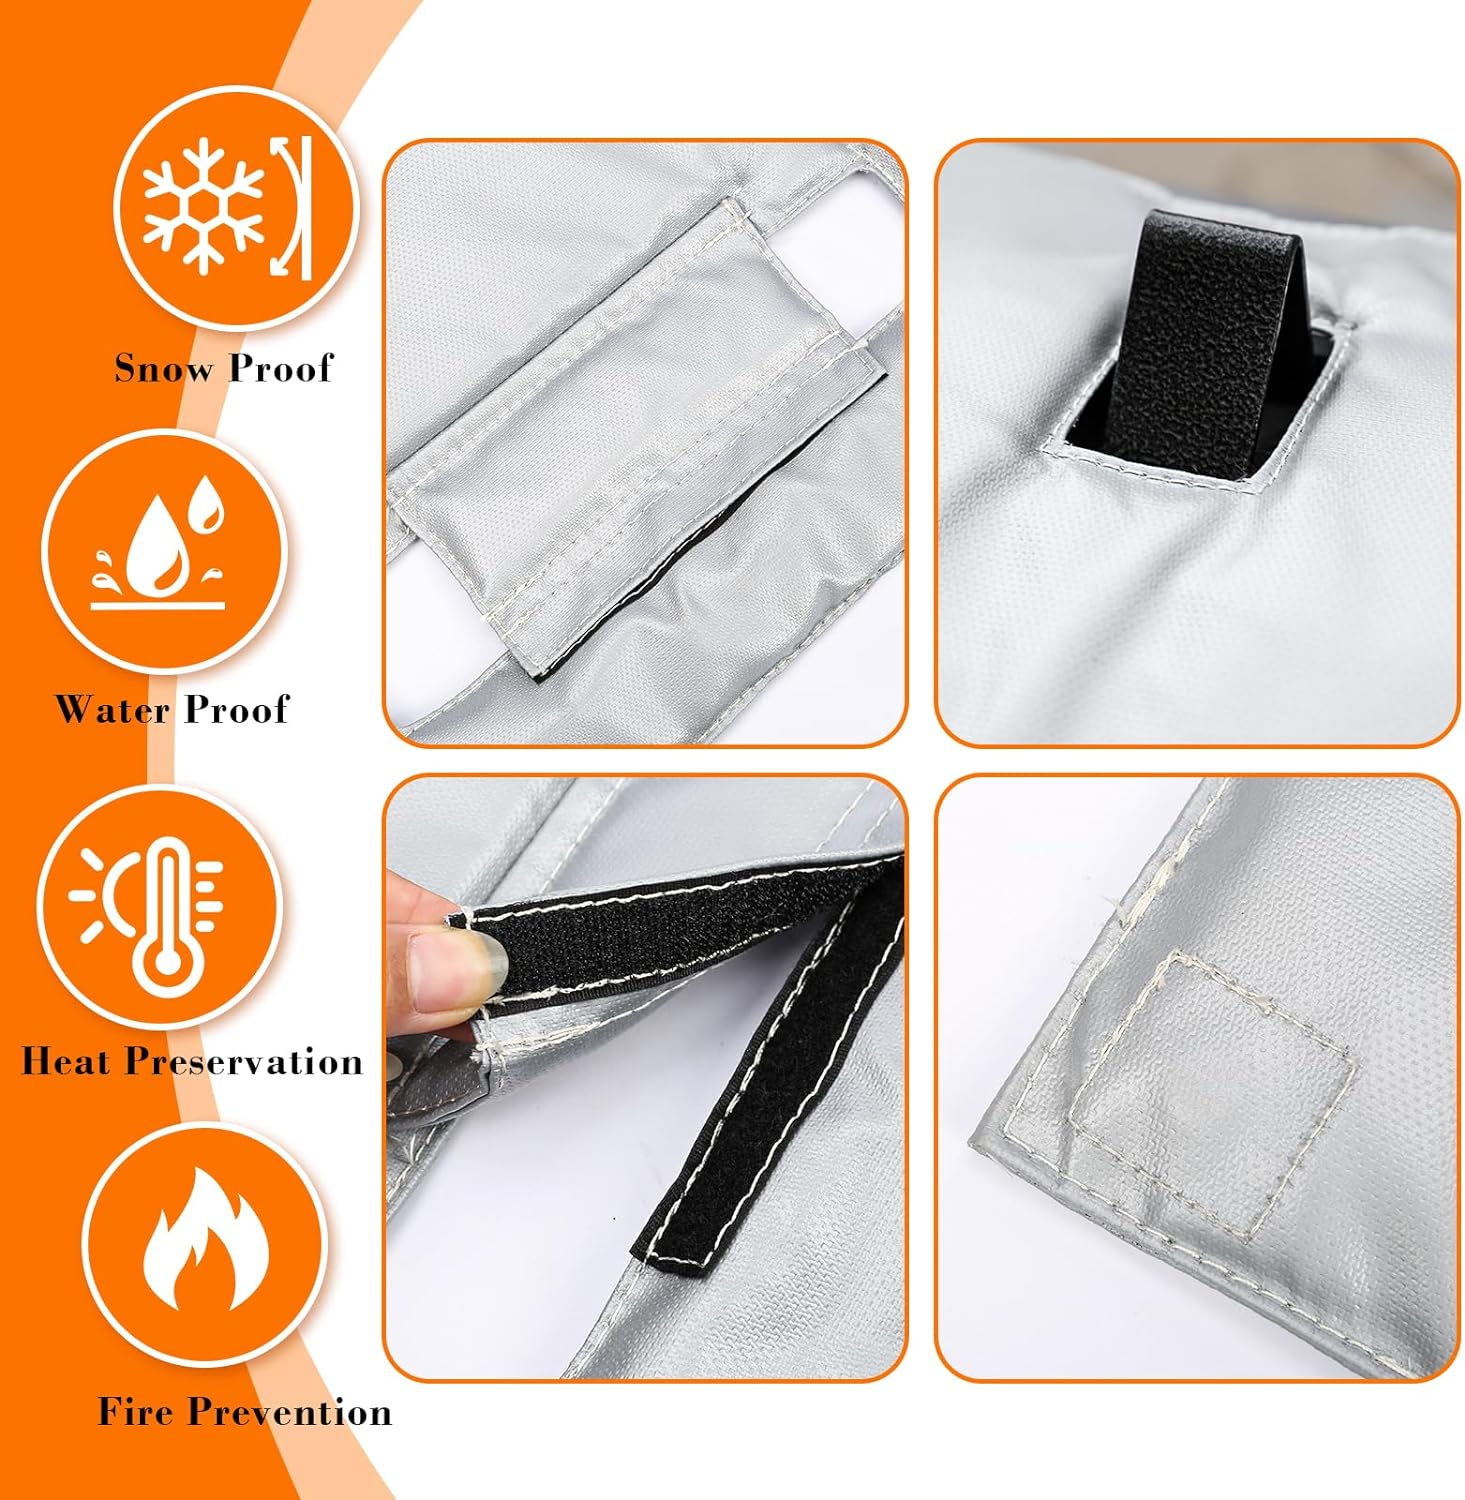 Thermal Insulated Blanket for Pit Boss Pro Series Triple-Function Combo Grill PB1100PSC2, PB1100PSC1, PB600PS1, PB1230SP, Pb1230G